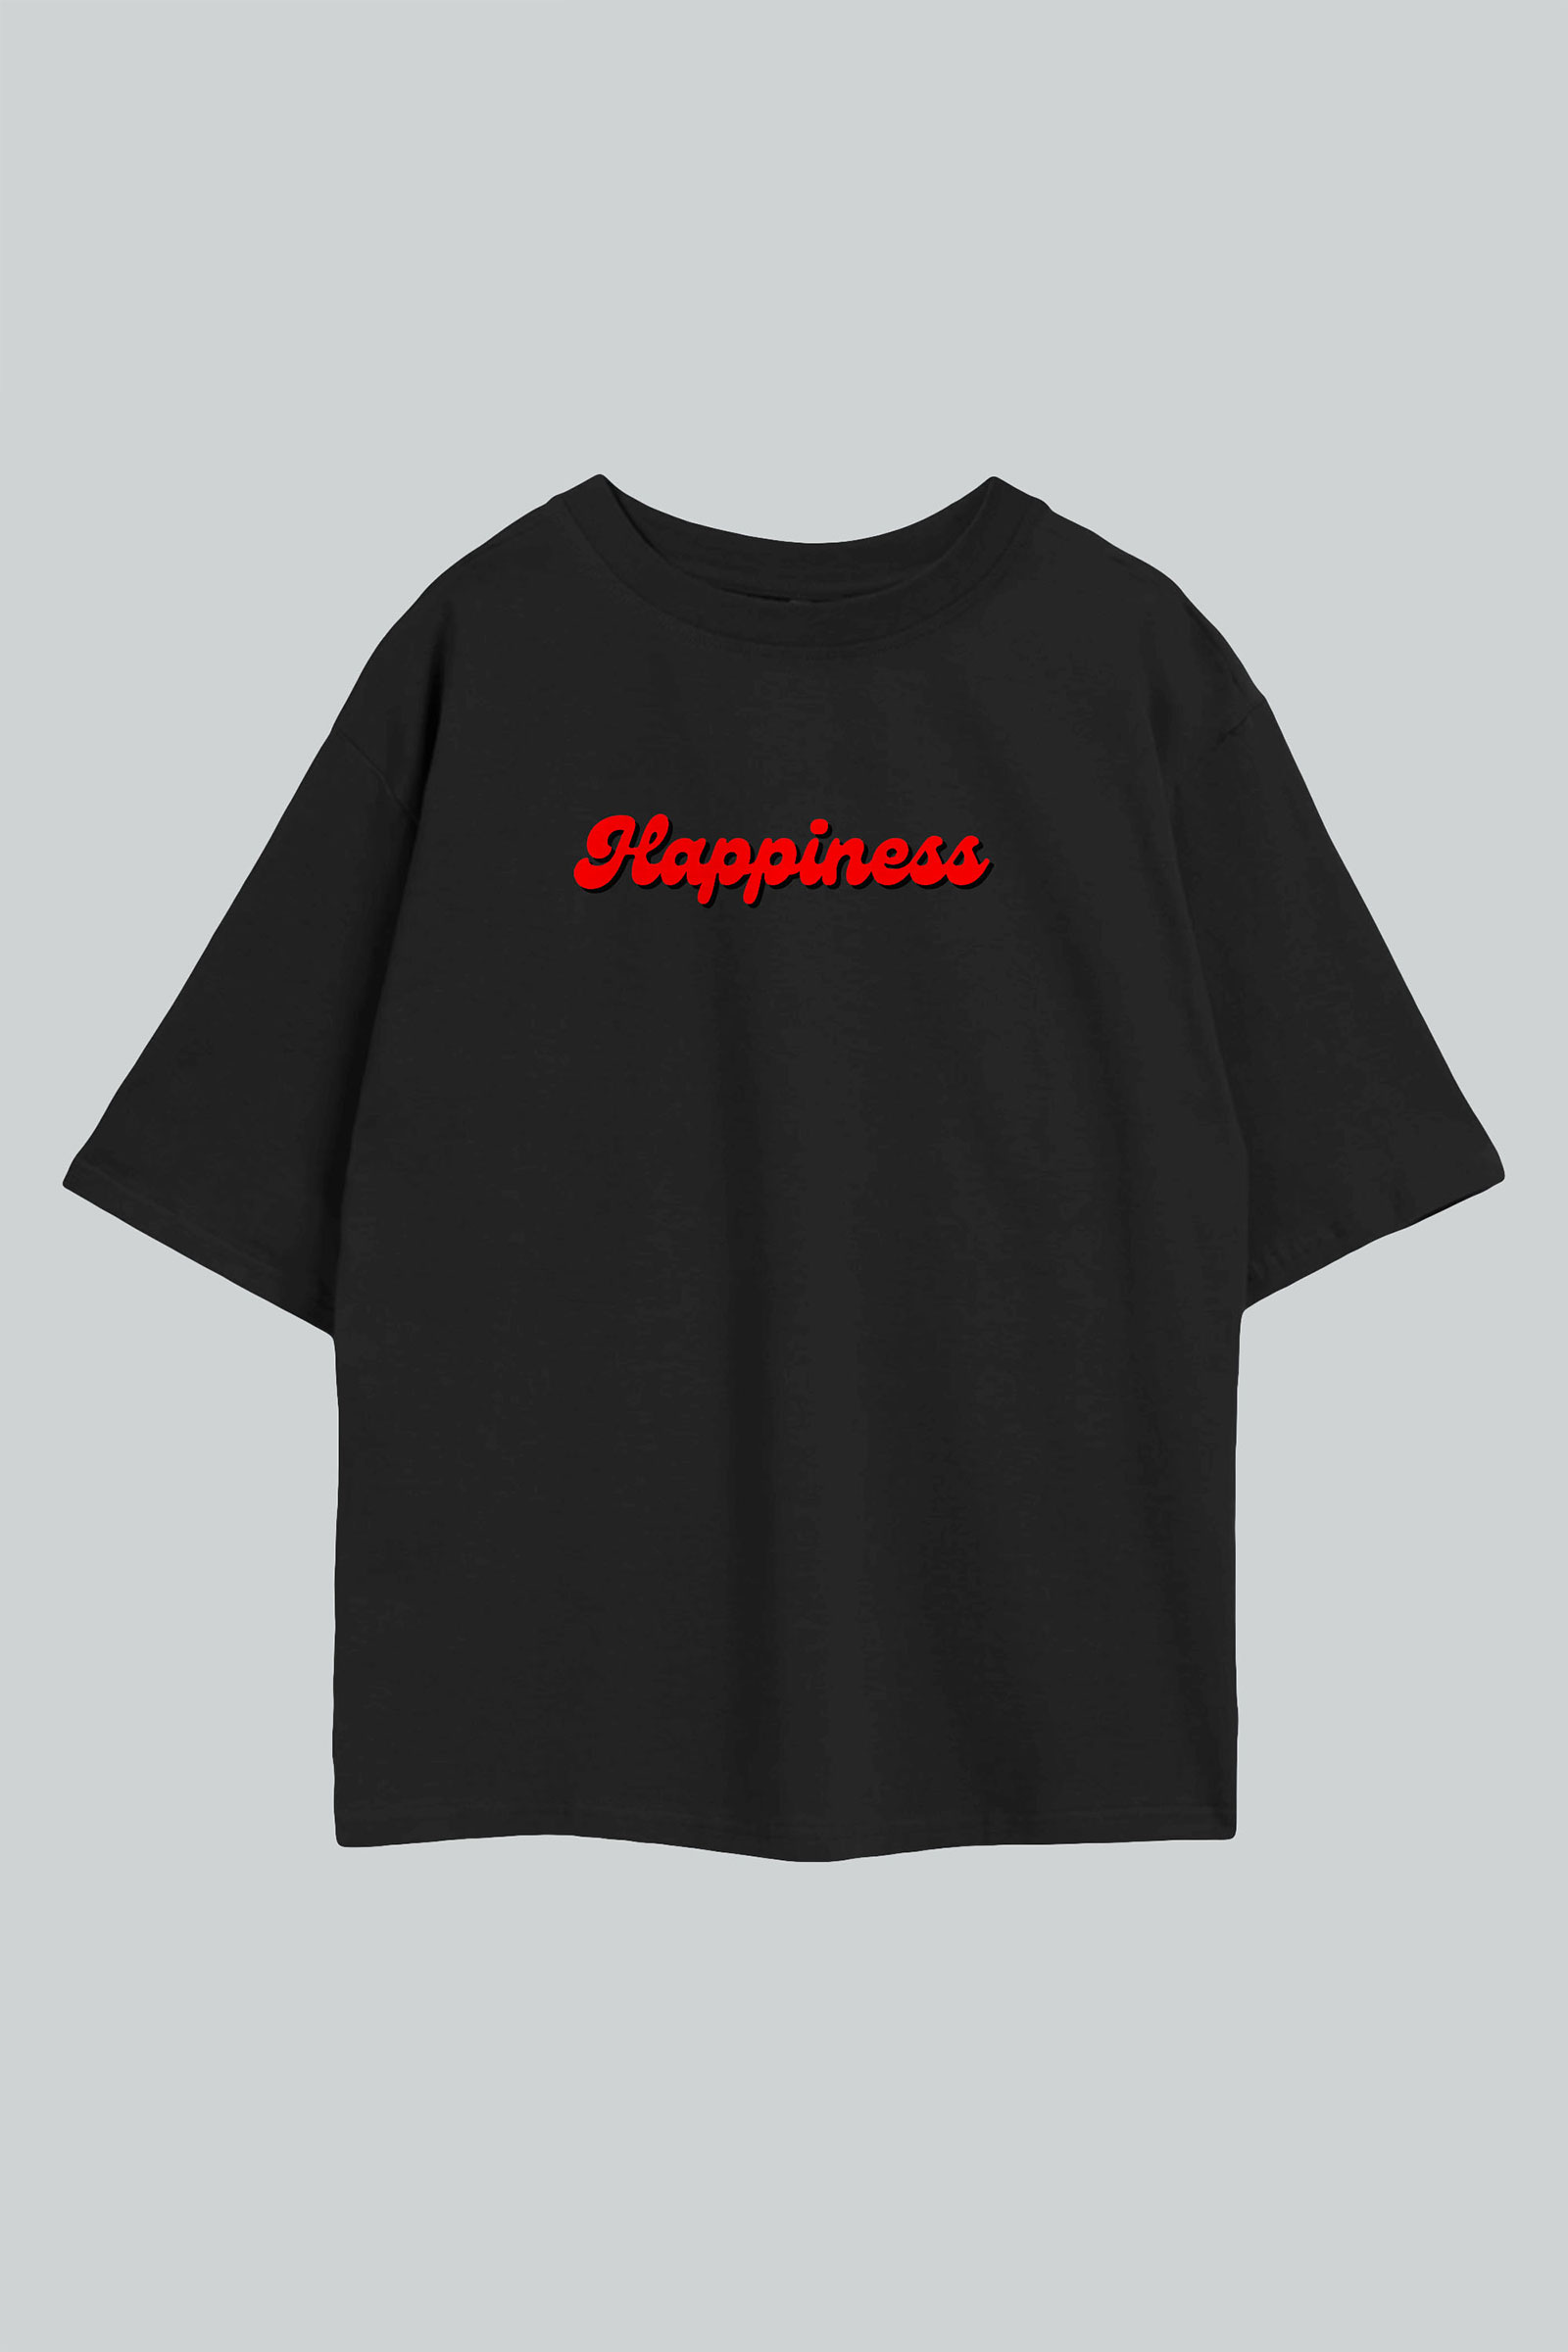 Happiness Black Oversize T-Shirt Front